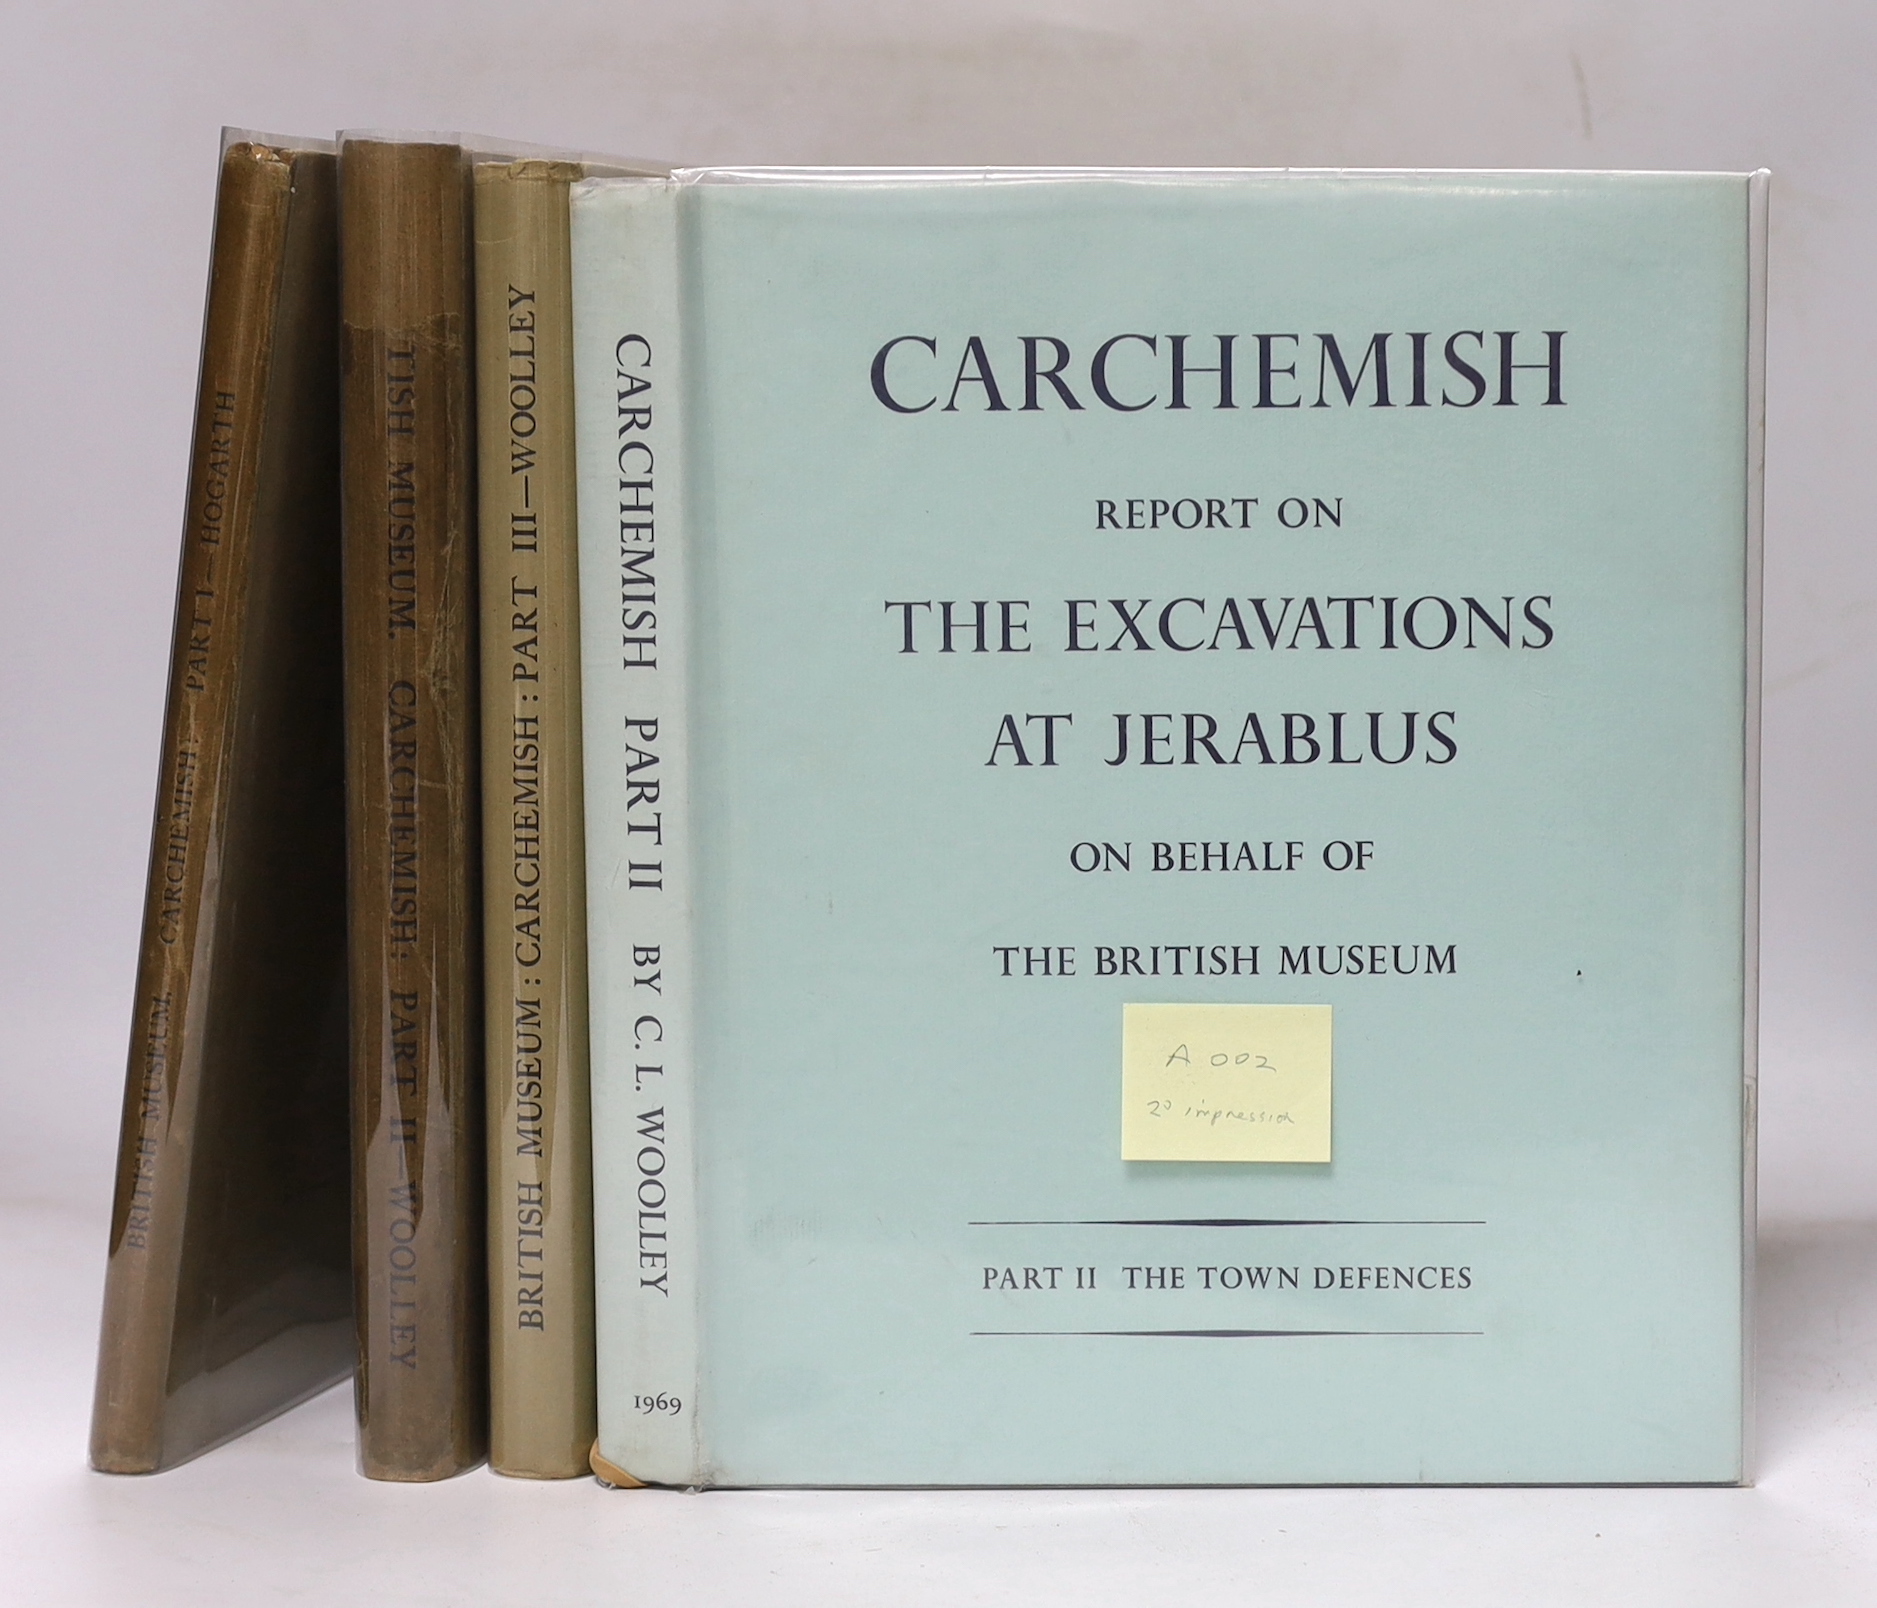 Lawrence, T.E, Woolley, C.L and Hogarth, D.G (intro) - Carchemish. Report on the Excavations at Djerabis on behalf of the British Museum, conducted by C. Leonard Woolley MA and TE Lawrence, Part I, British Museum 1914, F